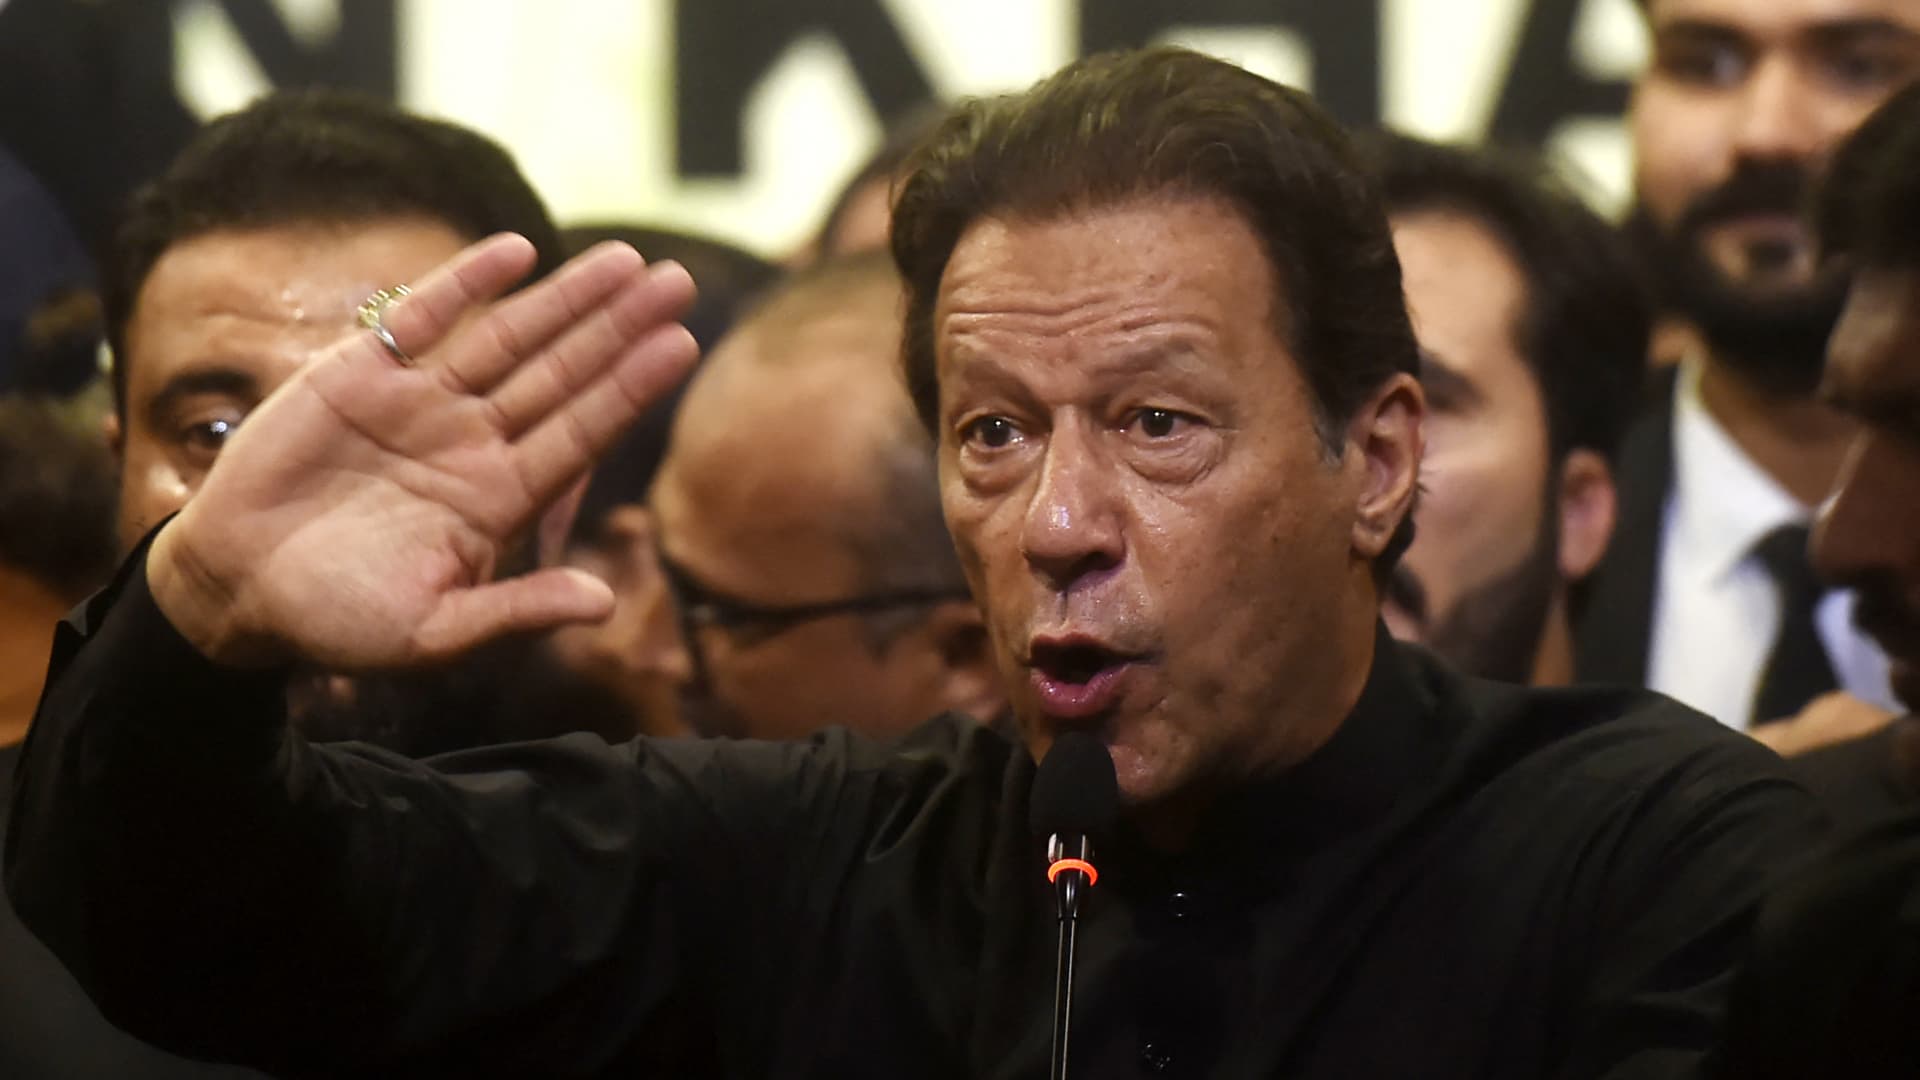 Former Pakistan PM Imran Khan reportedly shot and wounded